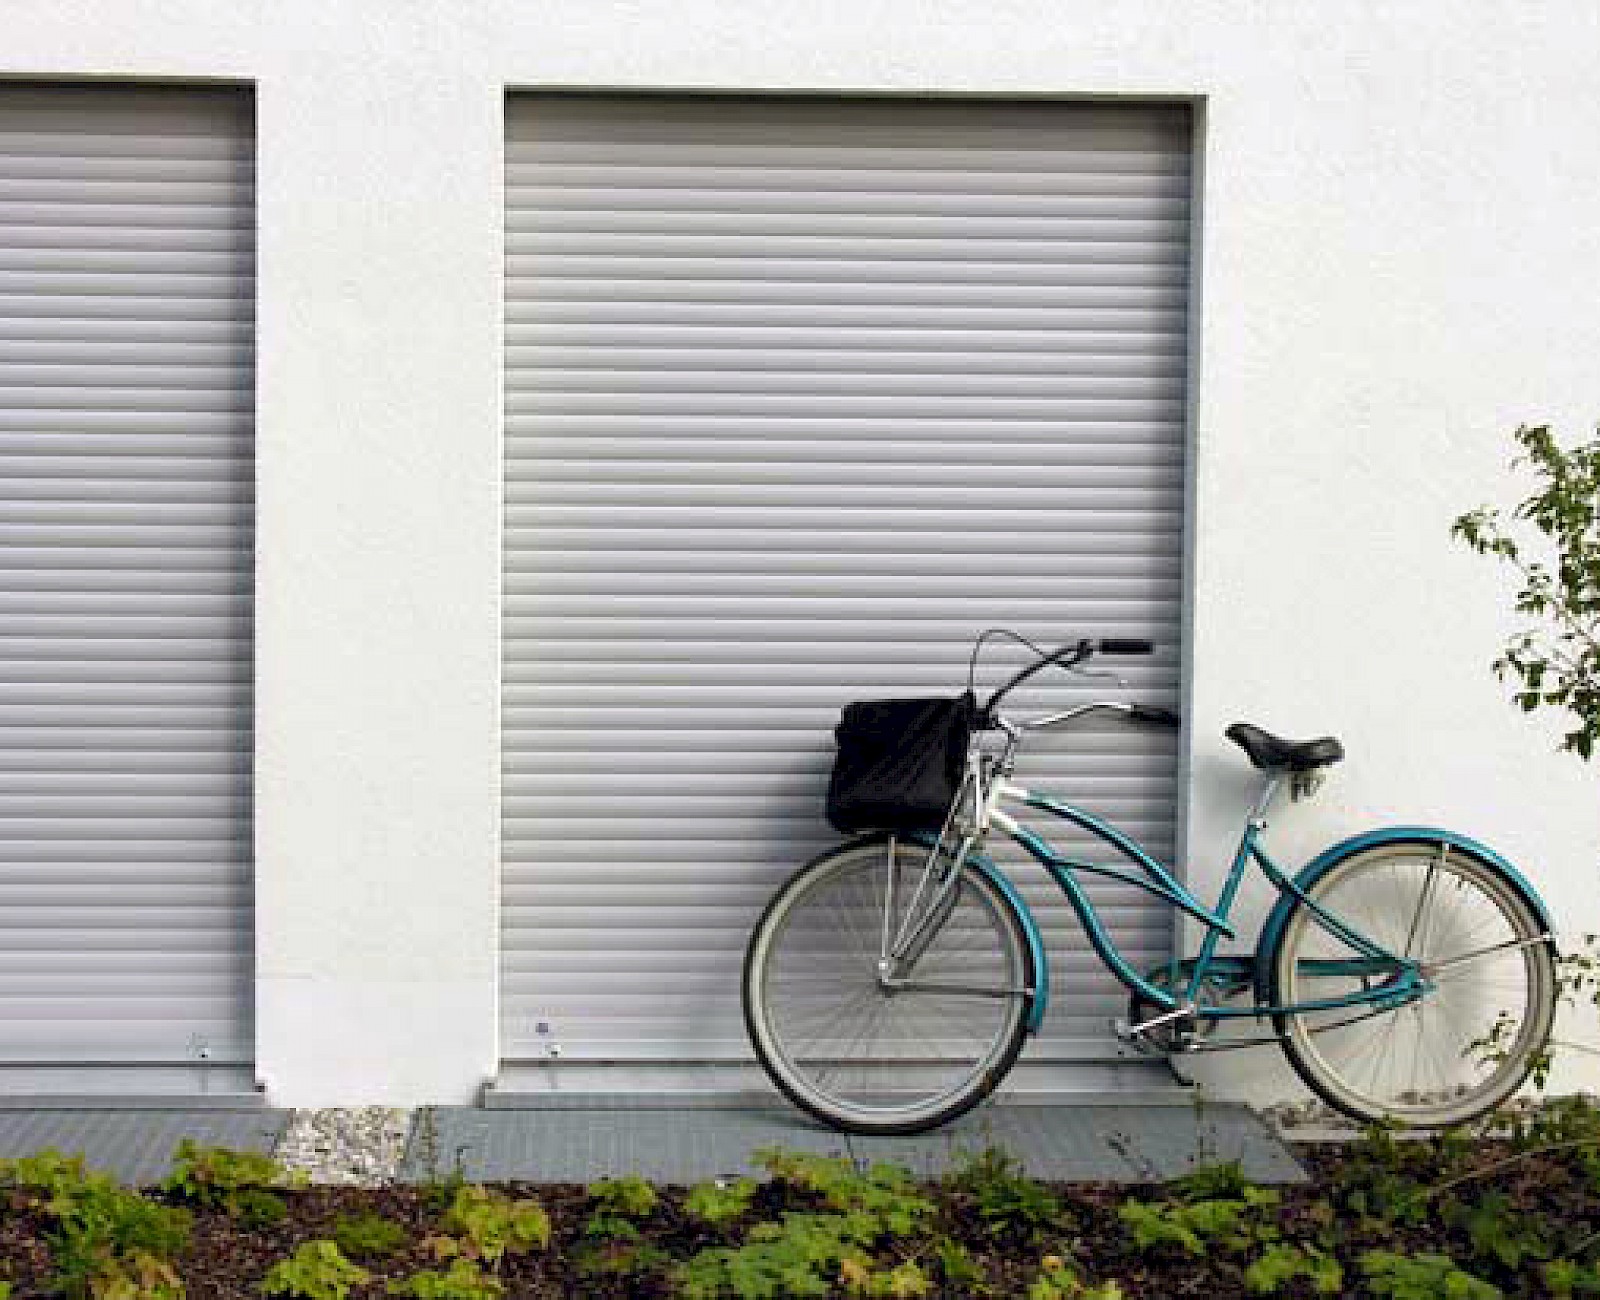 Bicycle in front of a shutter